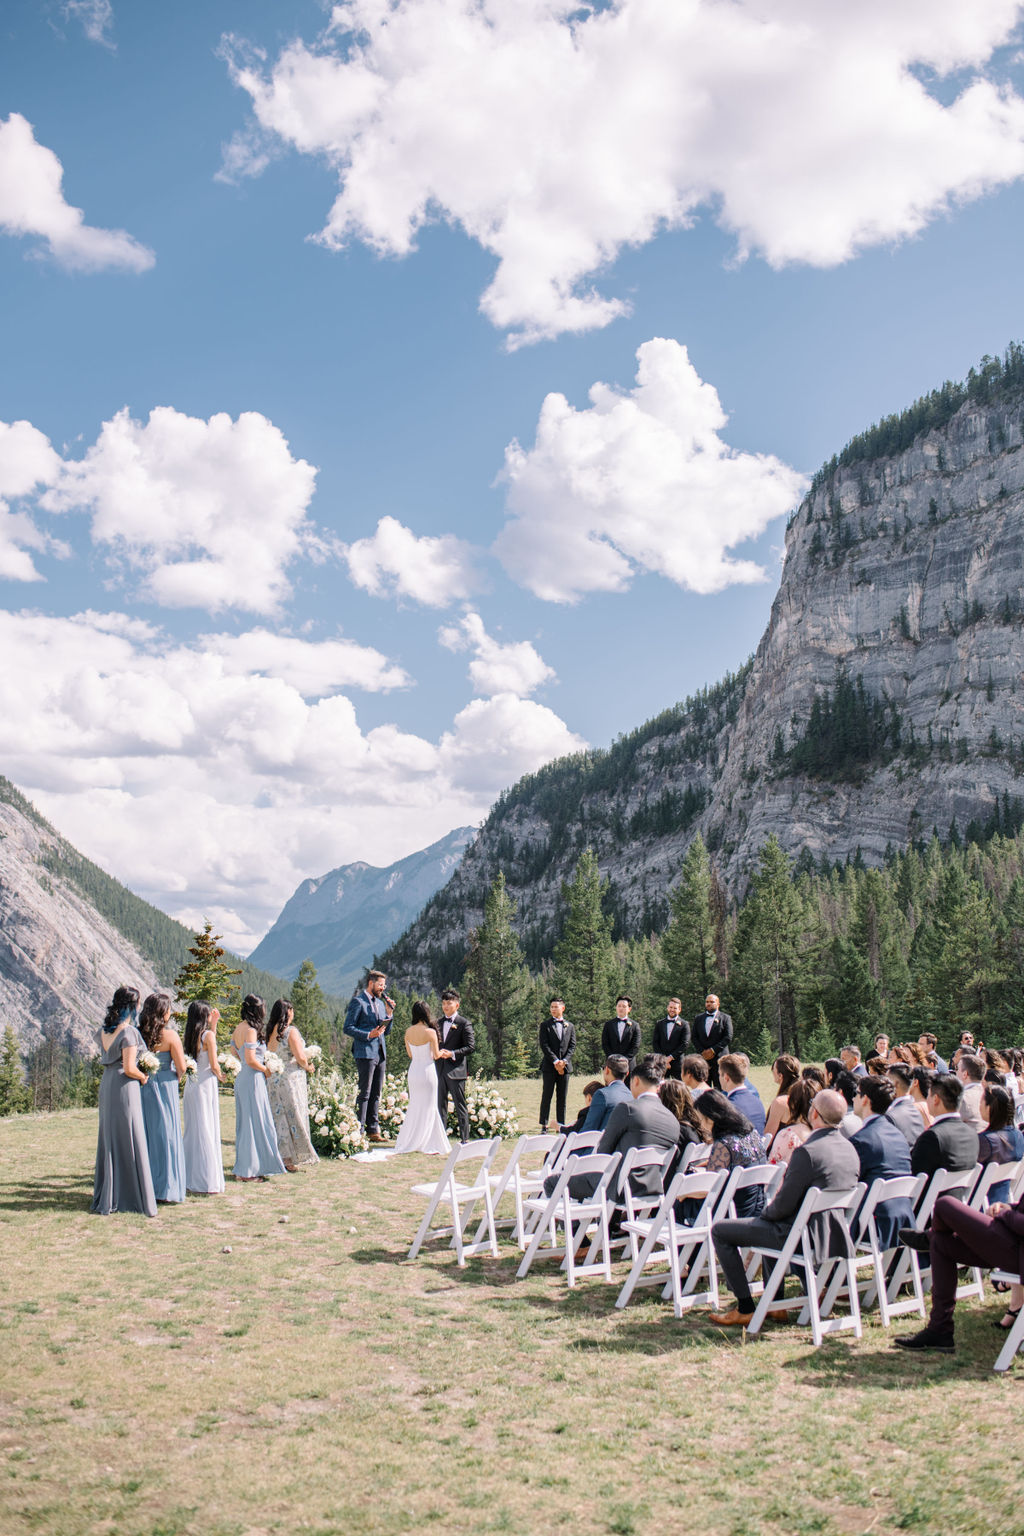 Bride and groom exchange vows during sophisticated mountain wedding in Banff, Alberta, Canada. Summer mountain wedding inspiration. 